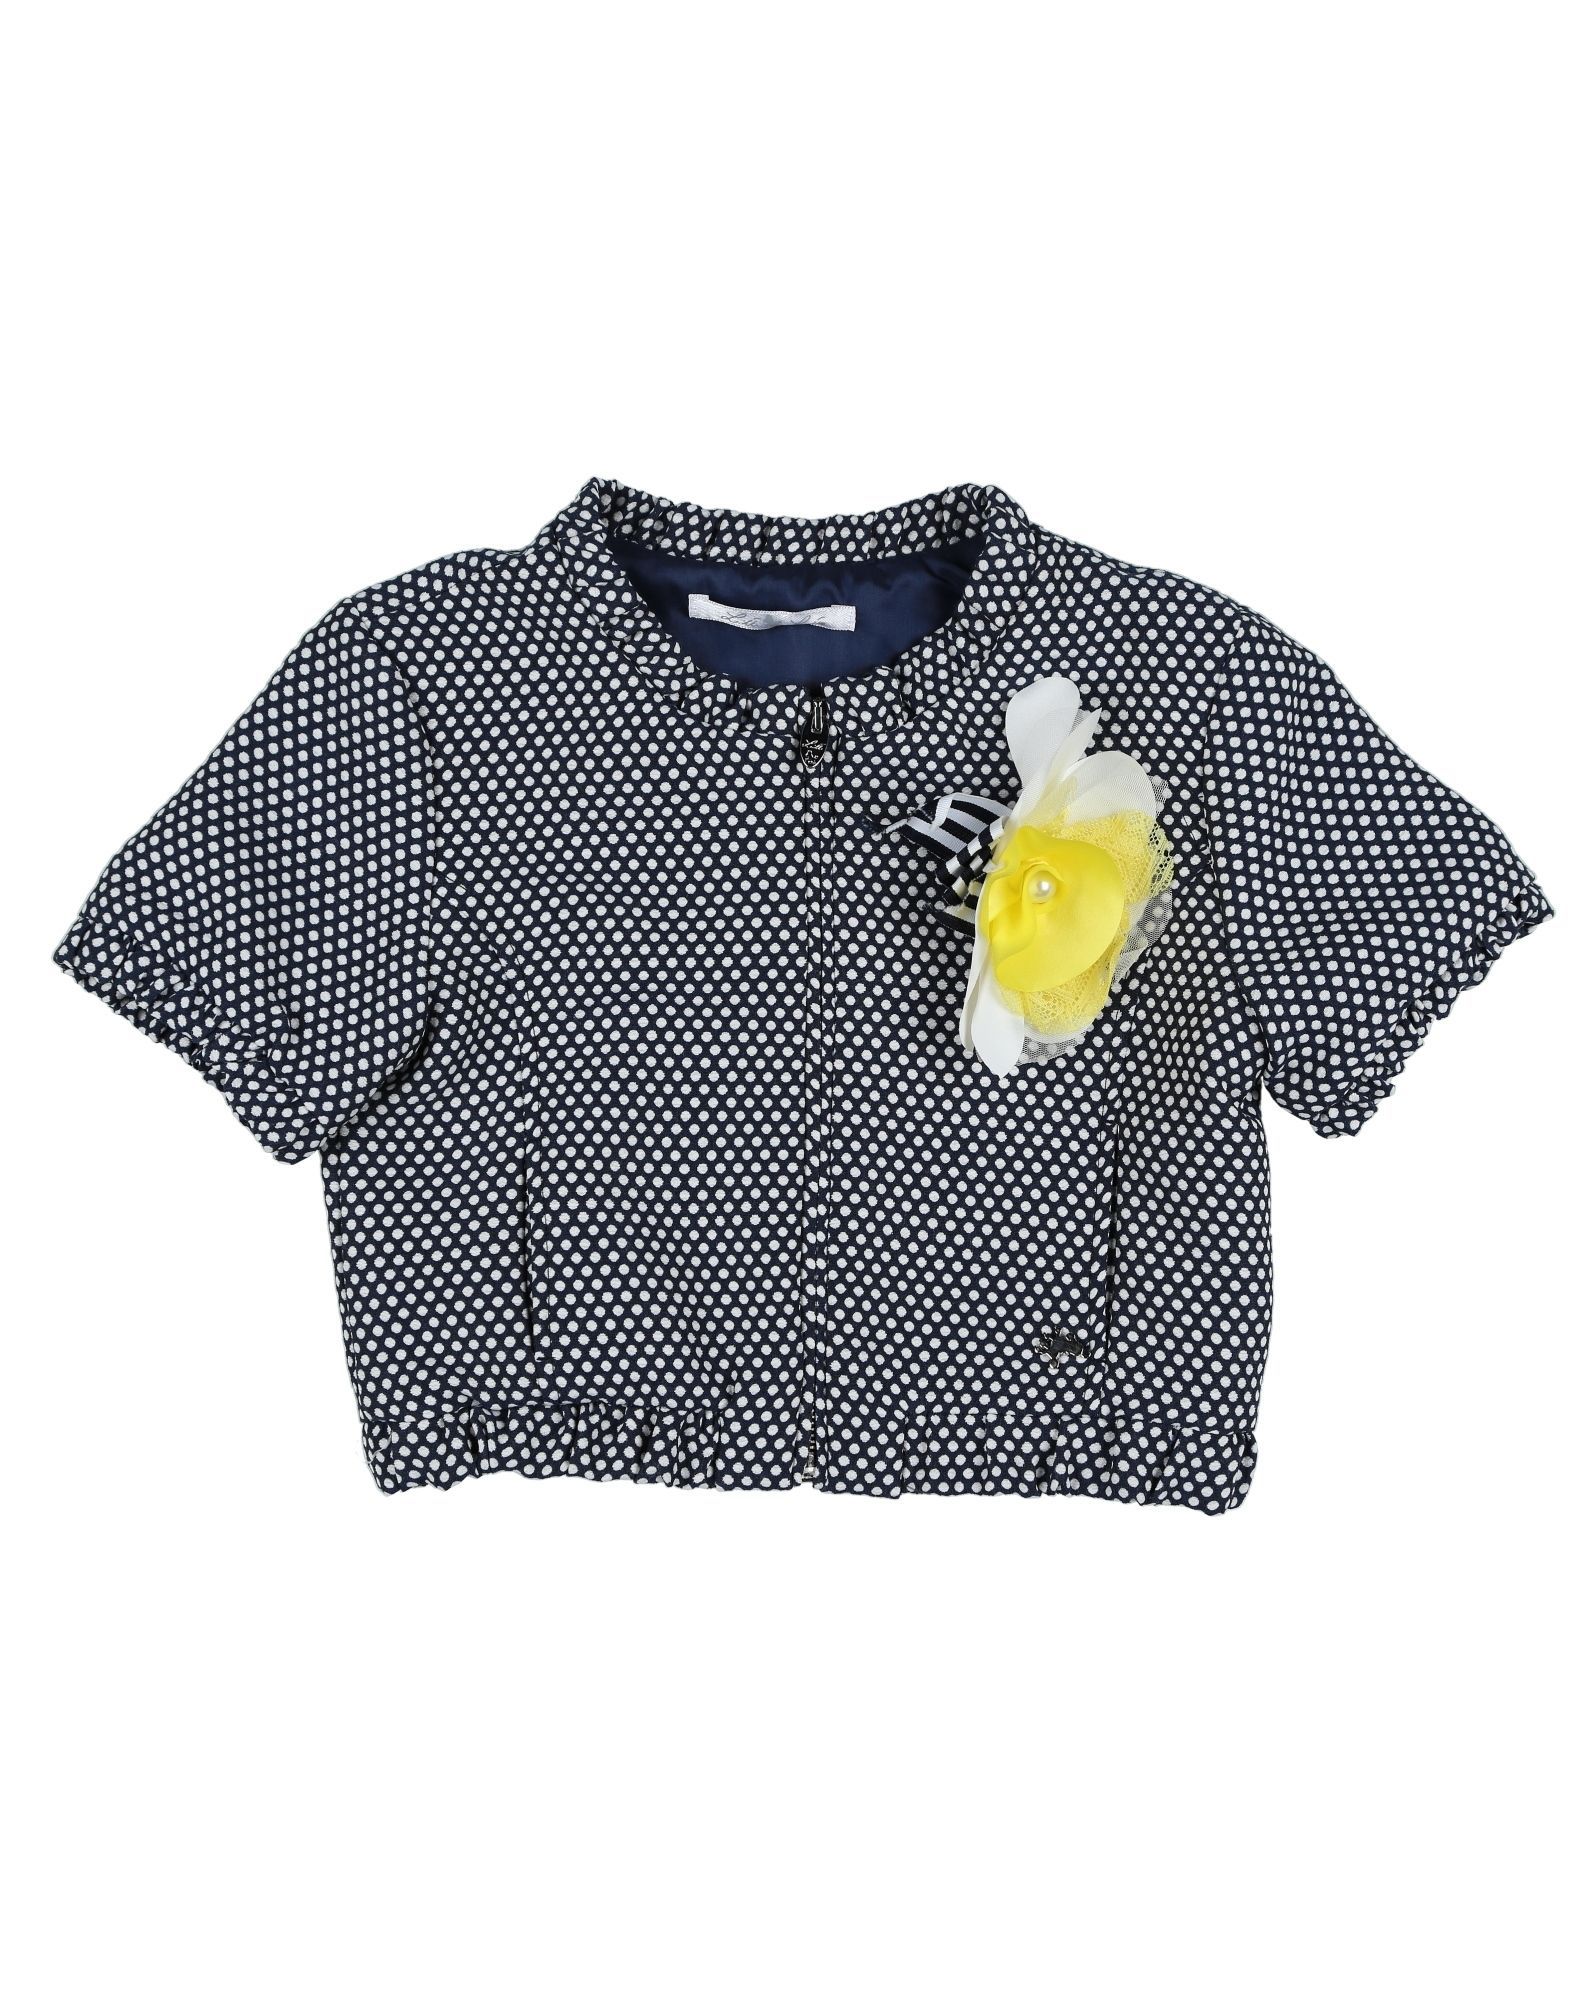 Crepe<br>No appliqu�s<br>Polka dots<br>Single-breasted <br>Zip<br>Round collar<br>Multipockets<br>Pocket with zip<br>Short sleeves<br>Fully lined<br>Wash at 30� c<br>Dry cleanable<br>Iron at 110� c max<br>Do not bleach<br>Do not tumble dry<br>Stretch<br>Generic outerwear<br>